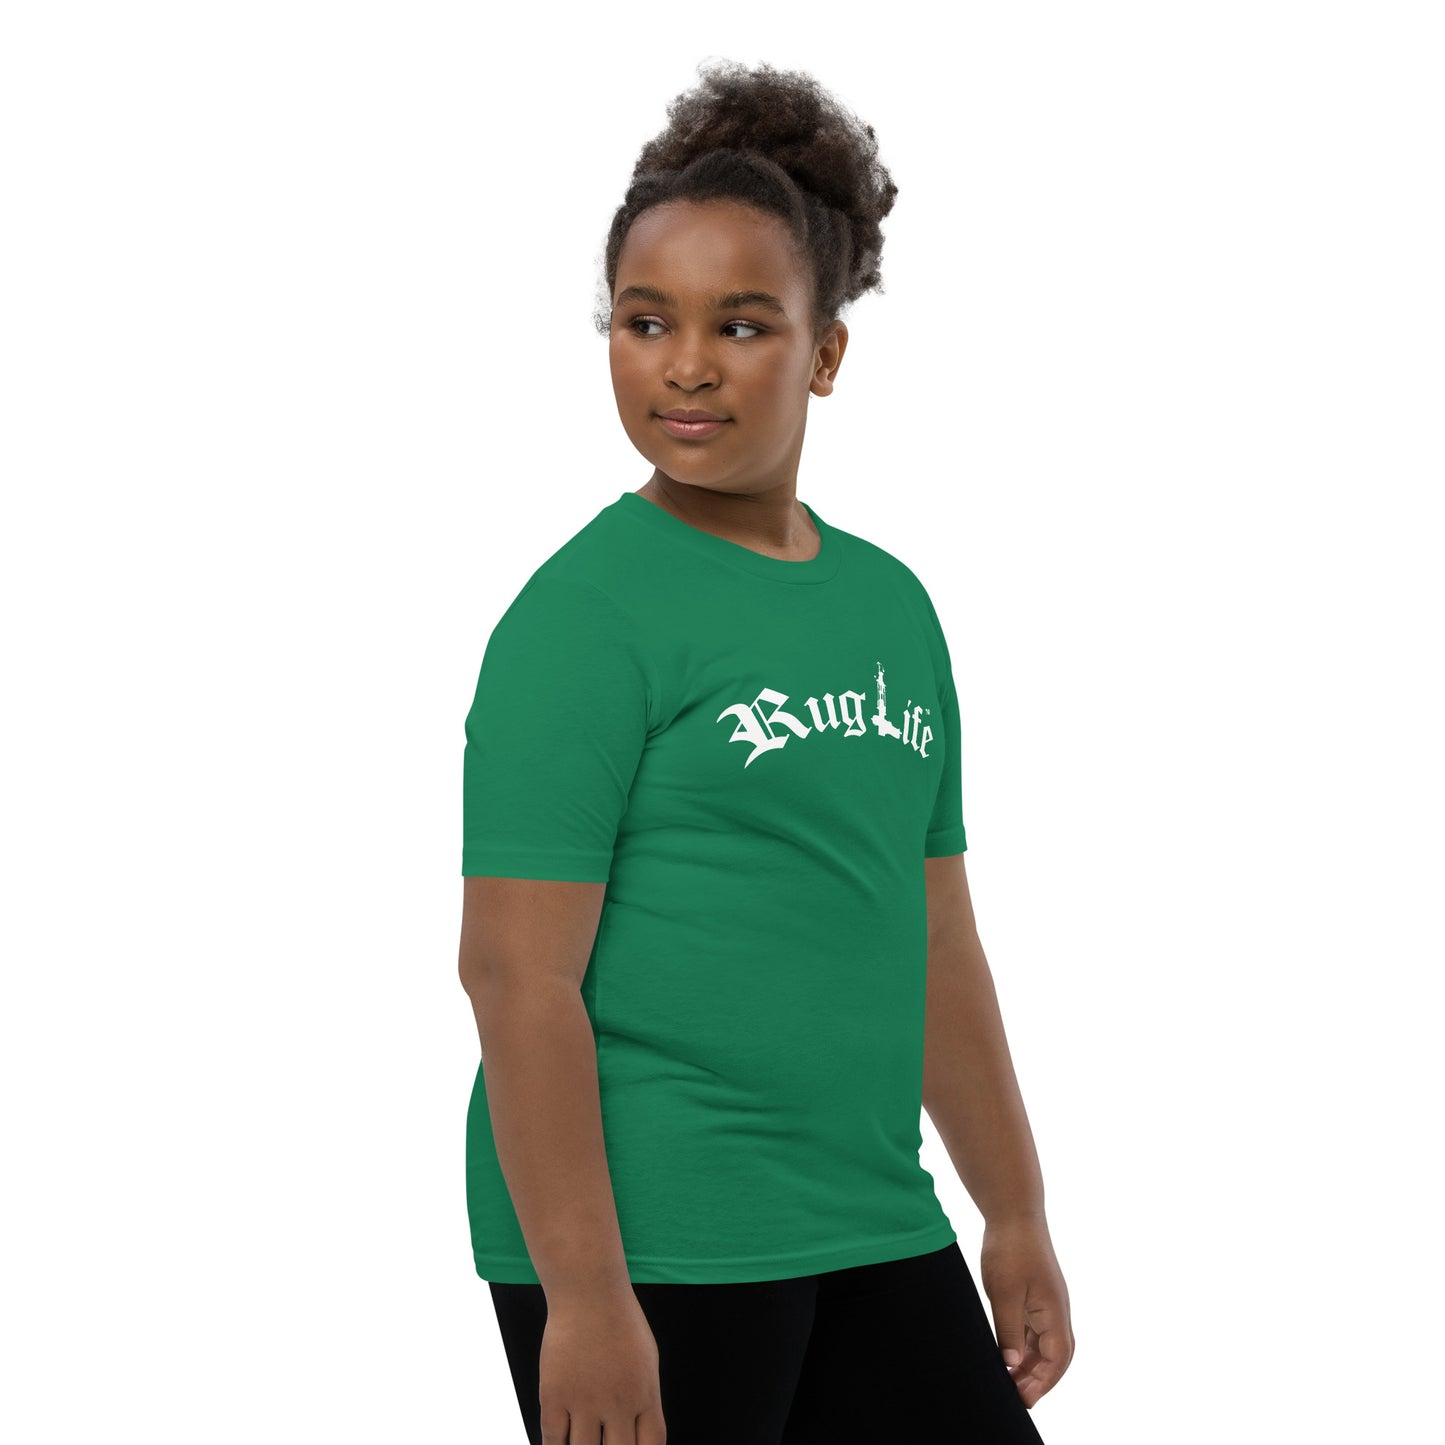 RugLife™ Youth Short Sleeve T-Shirt